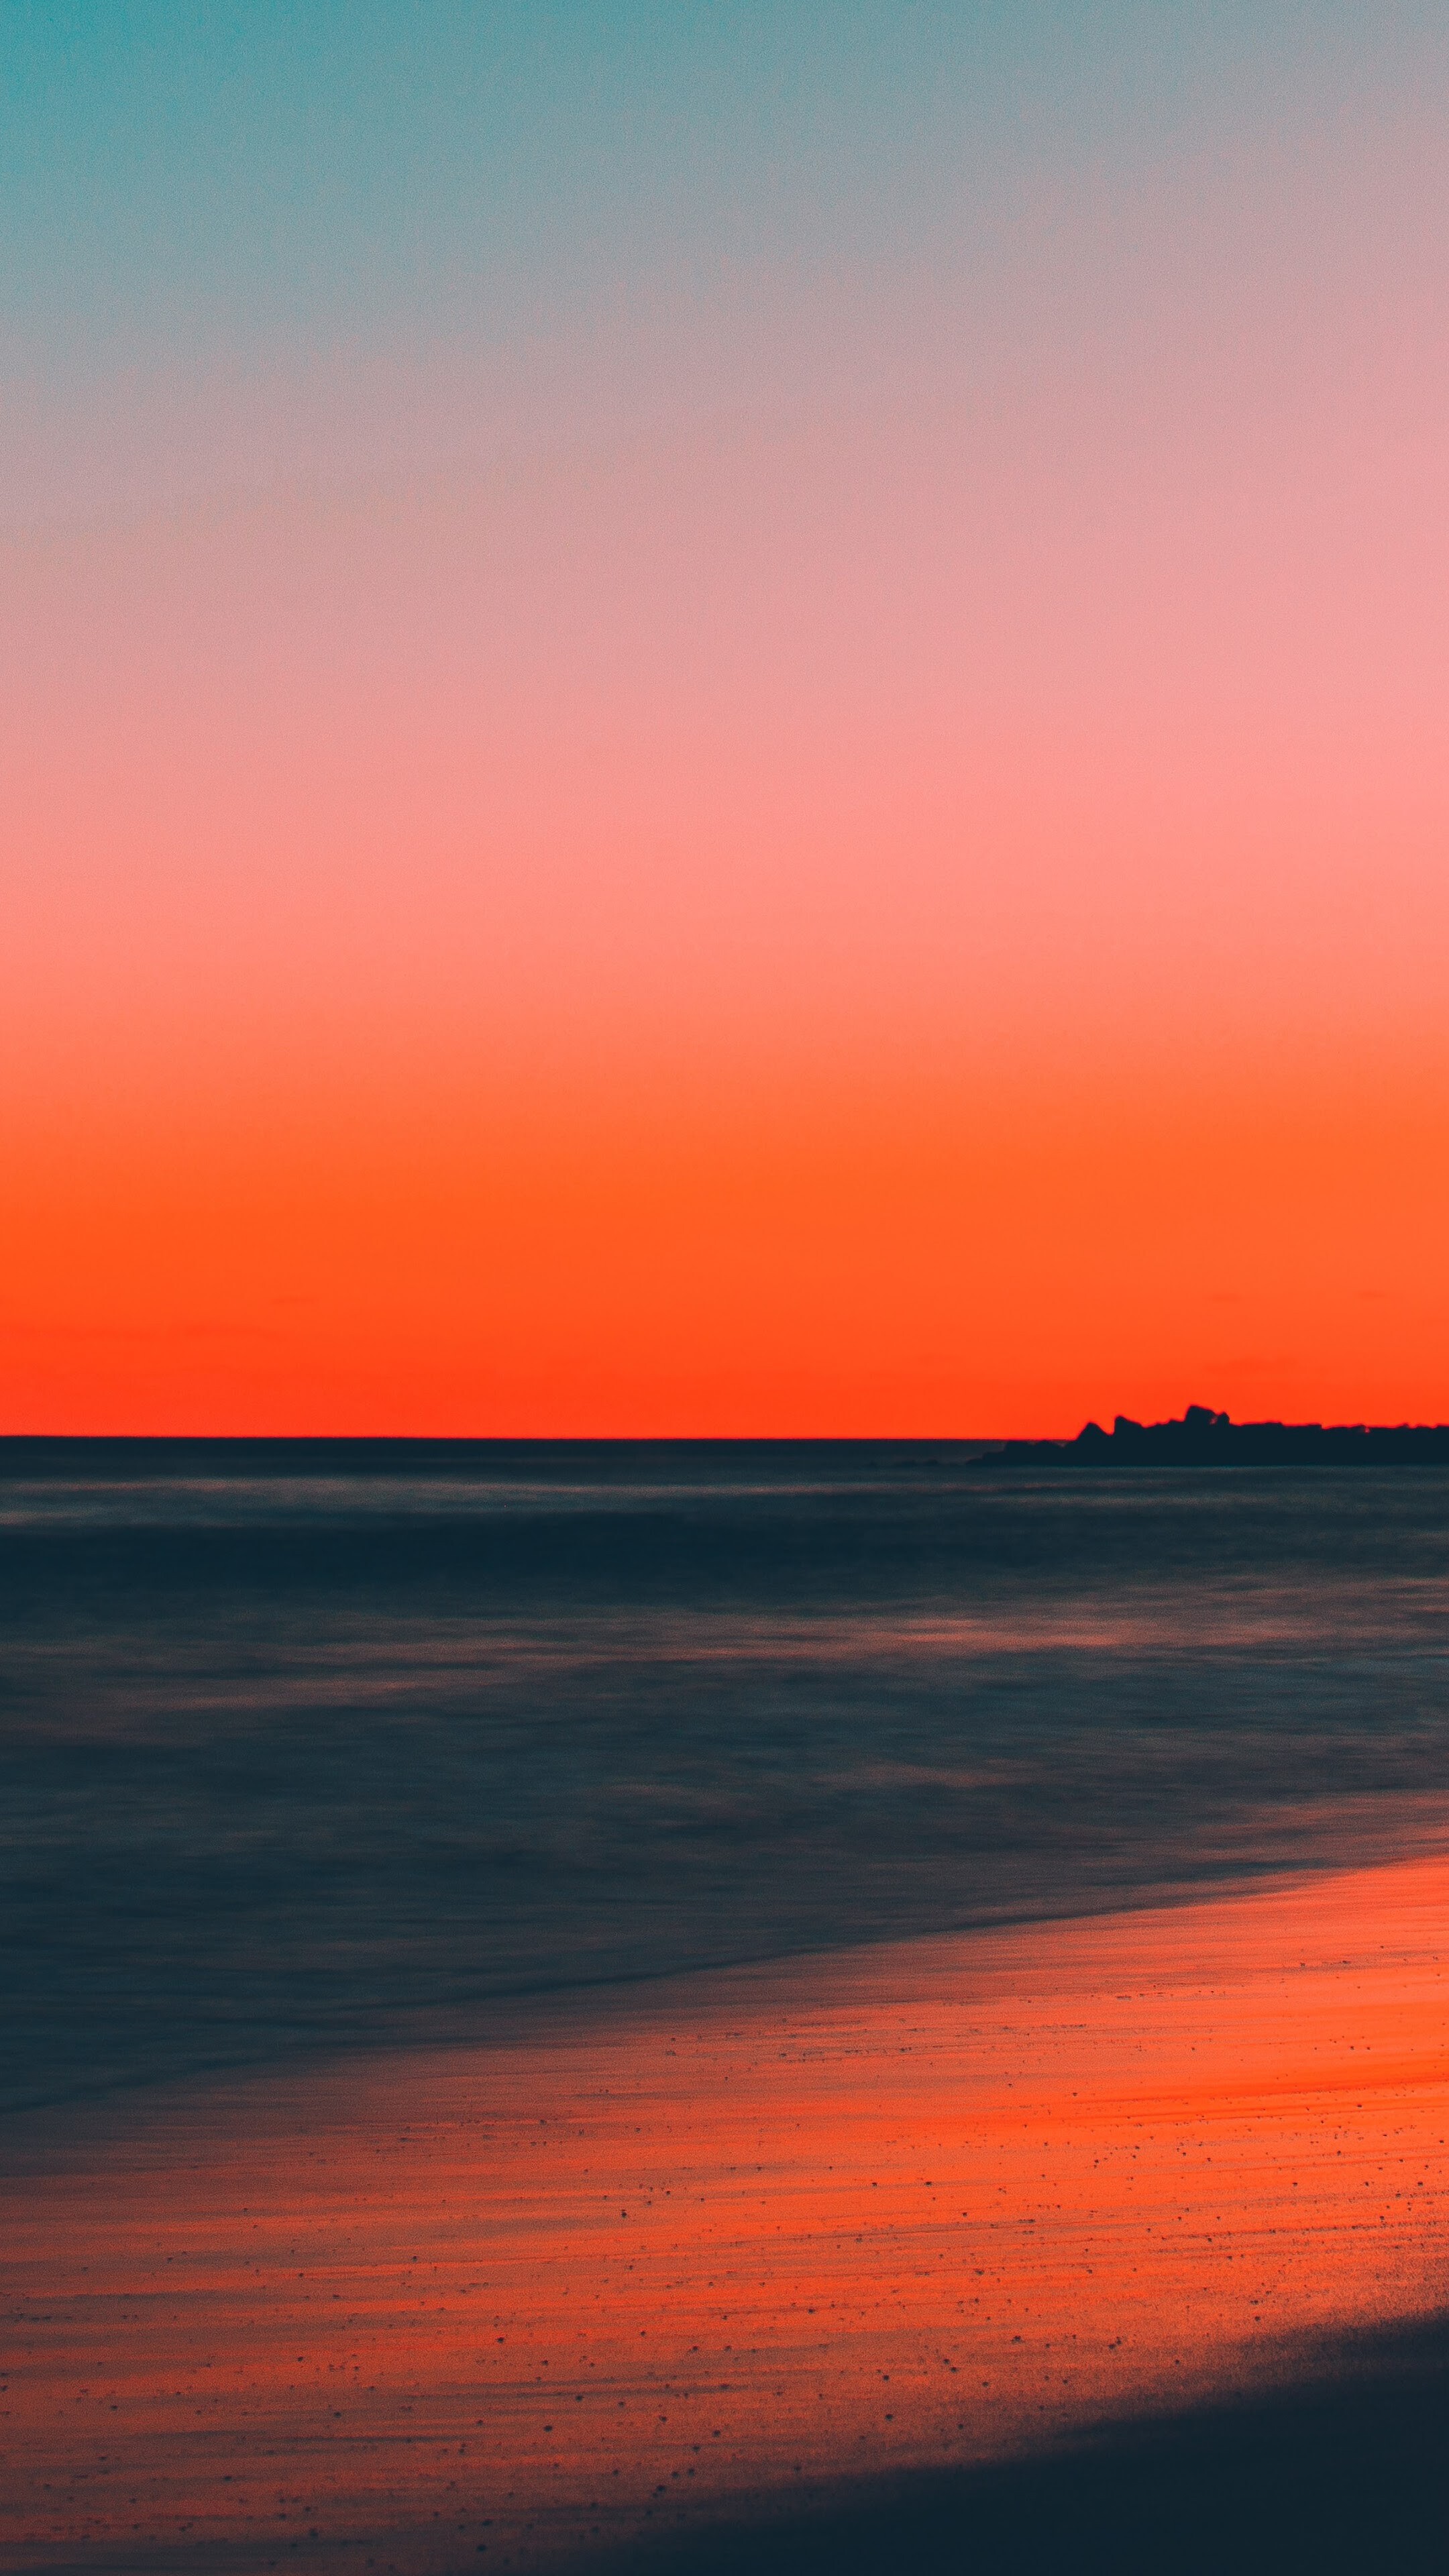 Sunset: The daily disappearance of the sun below the western horizon, Half-light. 2160x3840 4K Wallpaper.